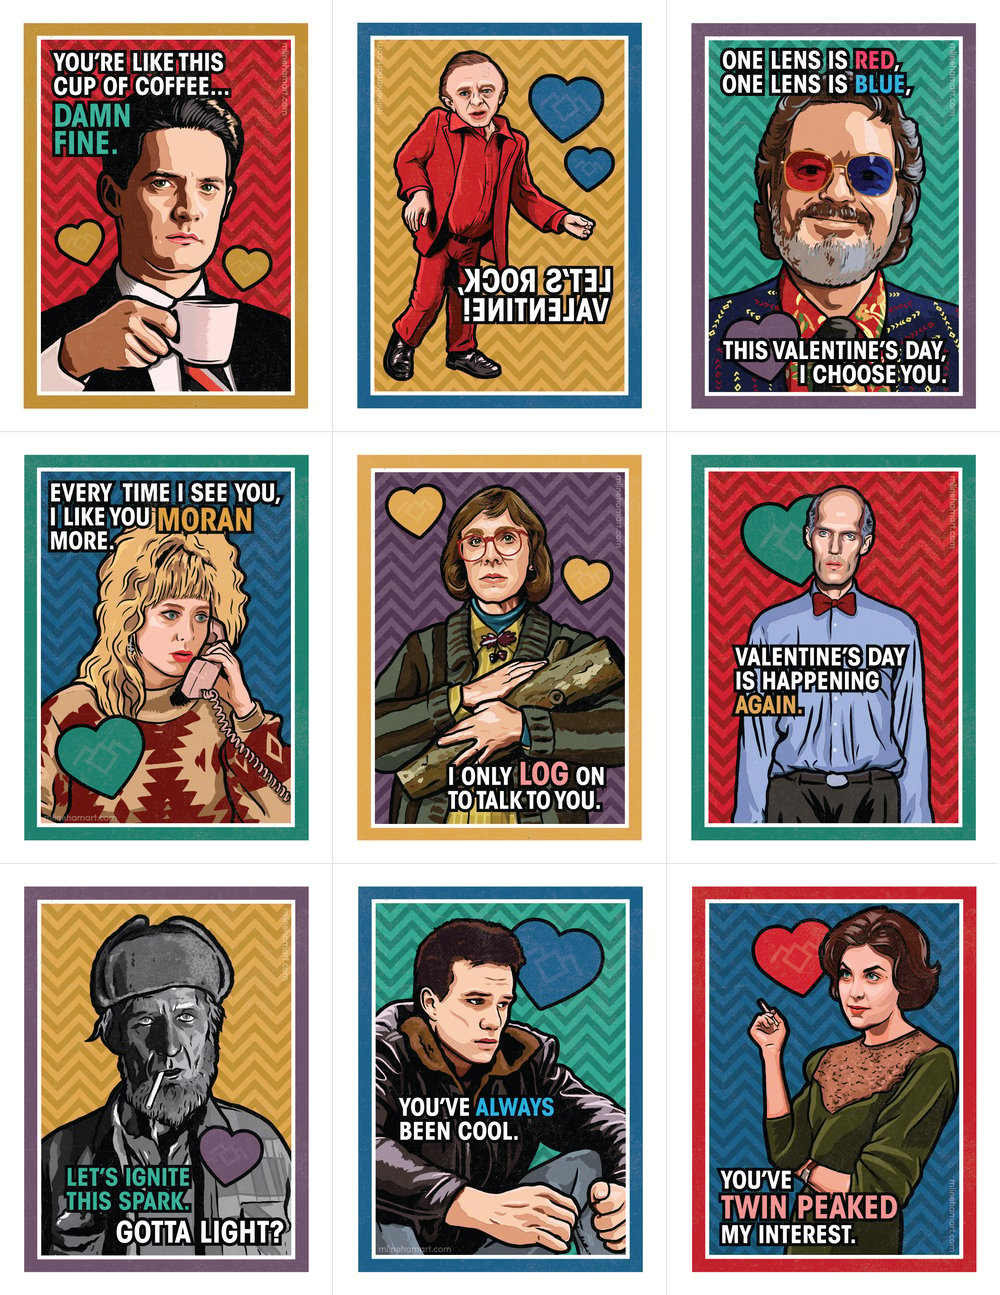 https://assets.bigcartel.com/product_images/210561853/Valentines-TwinPeaks-Website.jpg?auto=format&fit=max&w=1000